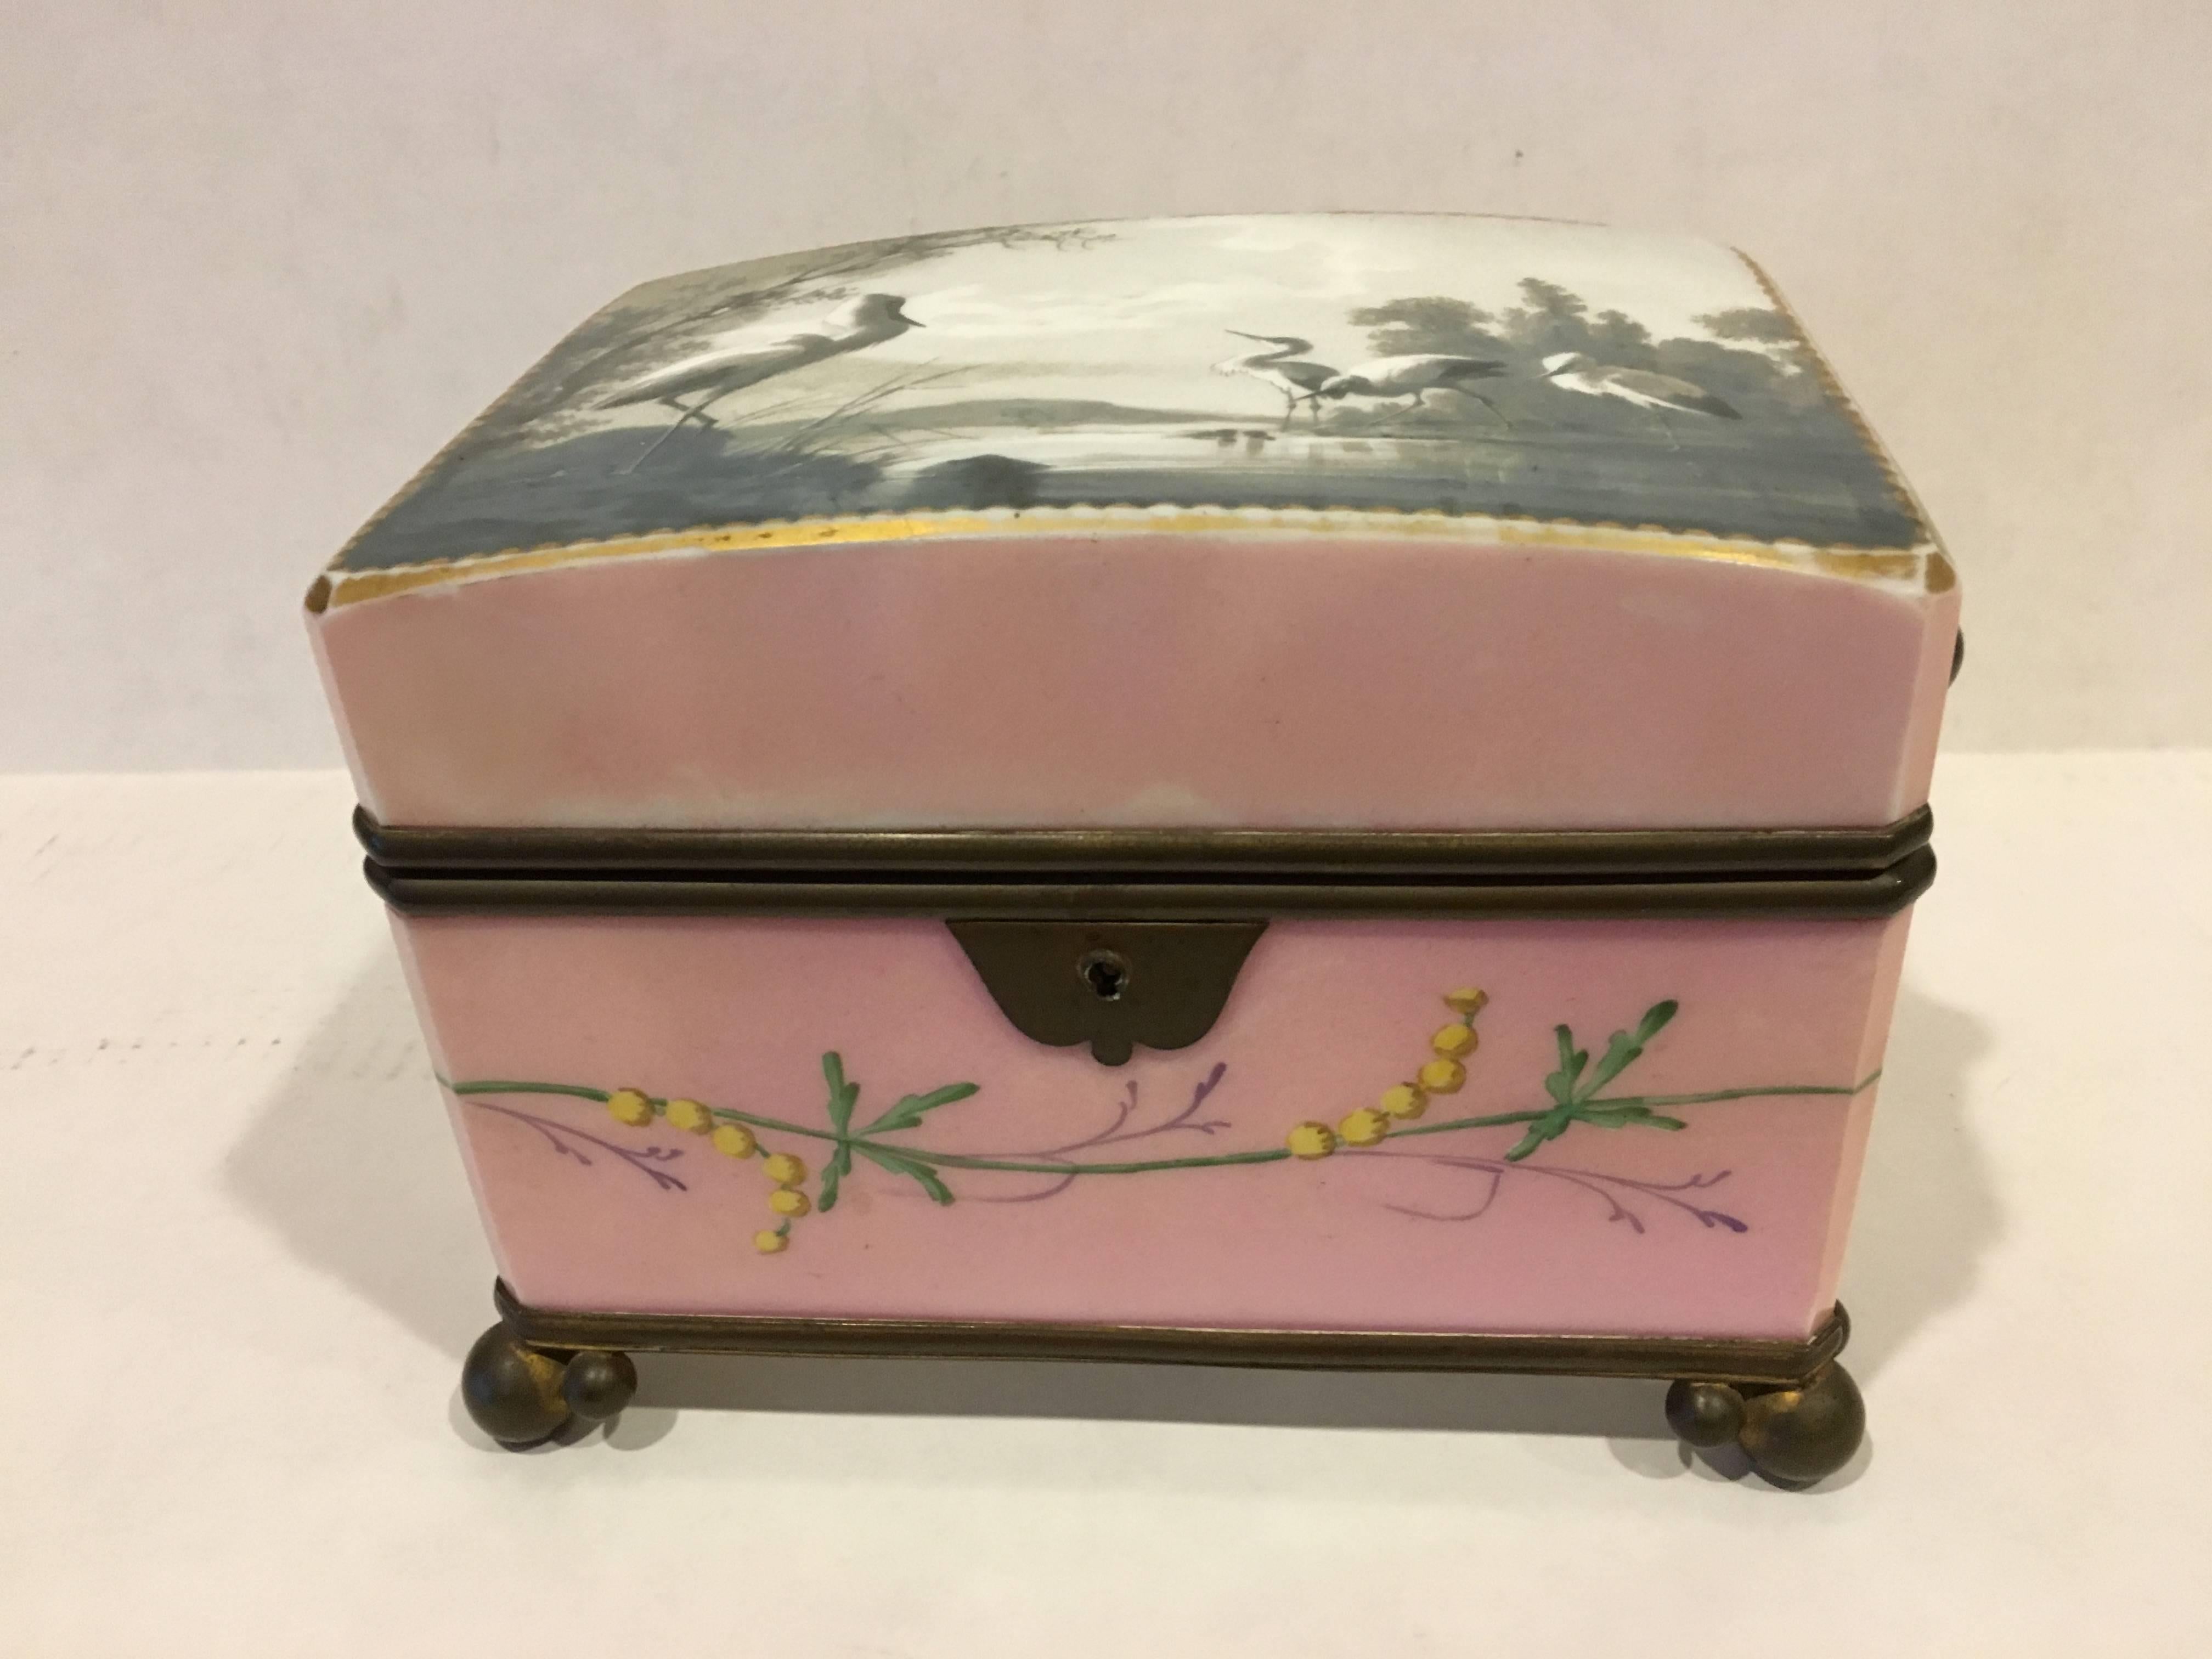 A beautiful hand painted porcelain pink casket box with a floral design all around the box and a grey and white water scene with egrets on the top.